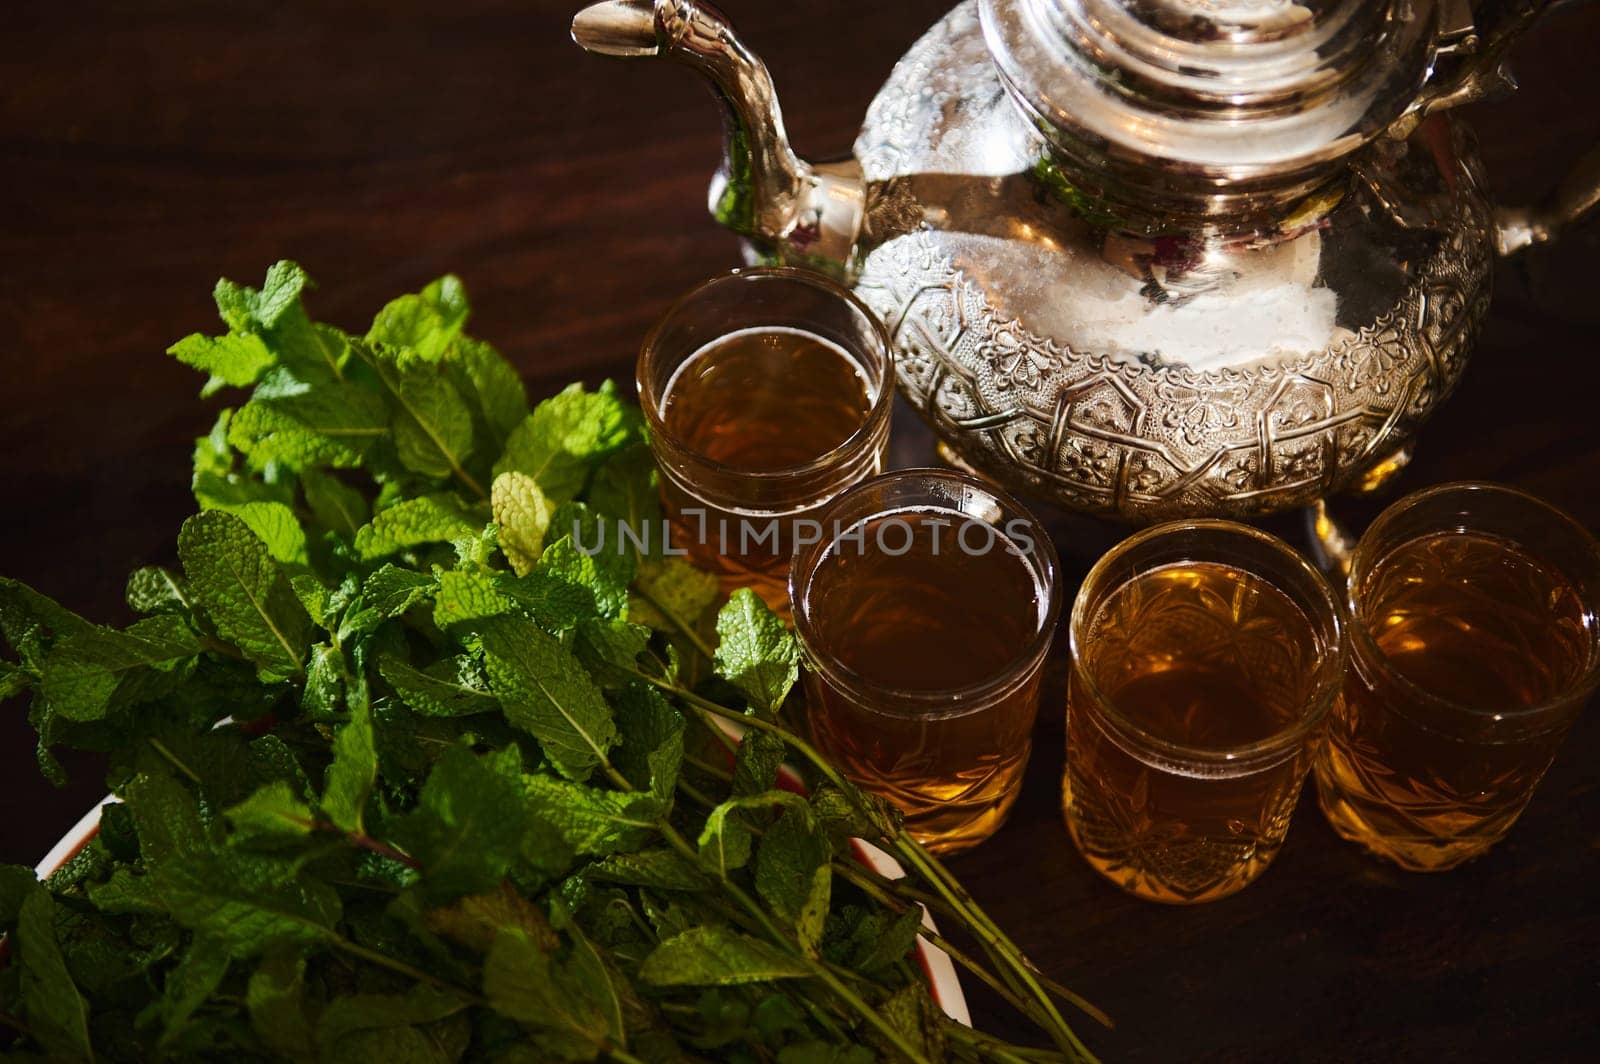 View from above of Drinking glasses with fresh Moroccan tea with mint and silver traditional tea pot on wooden table by artgf